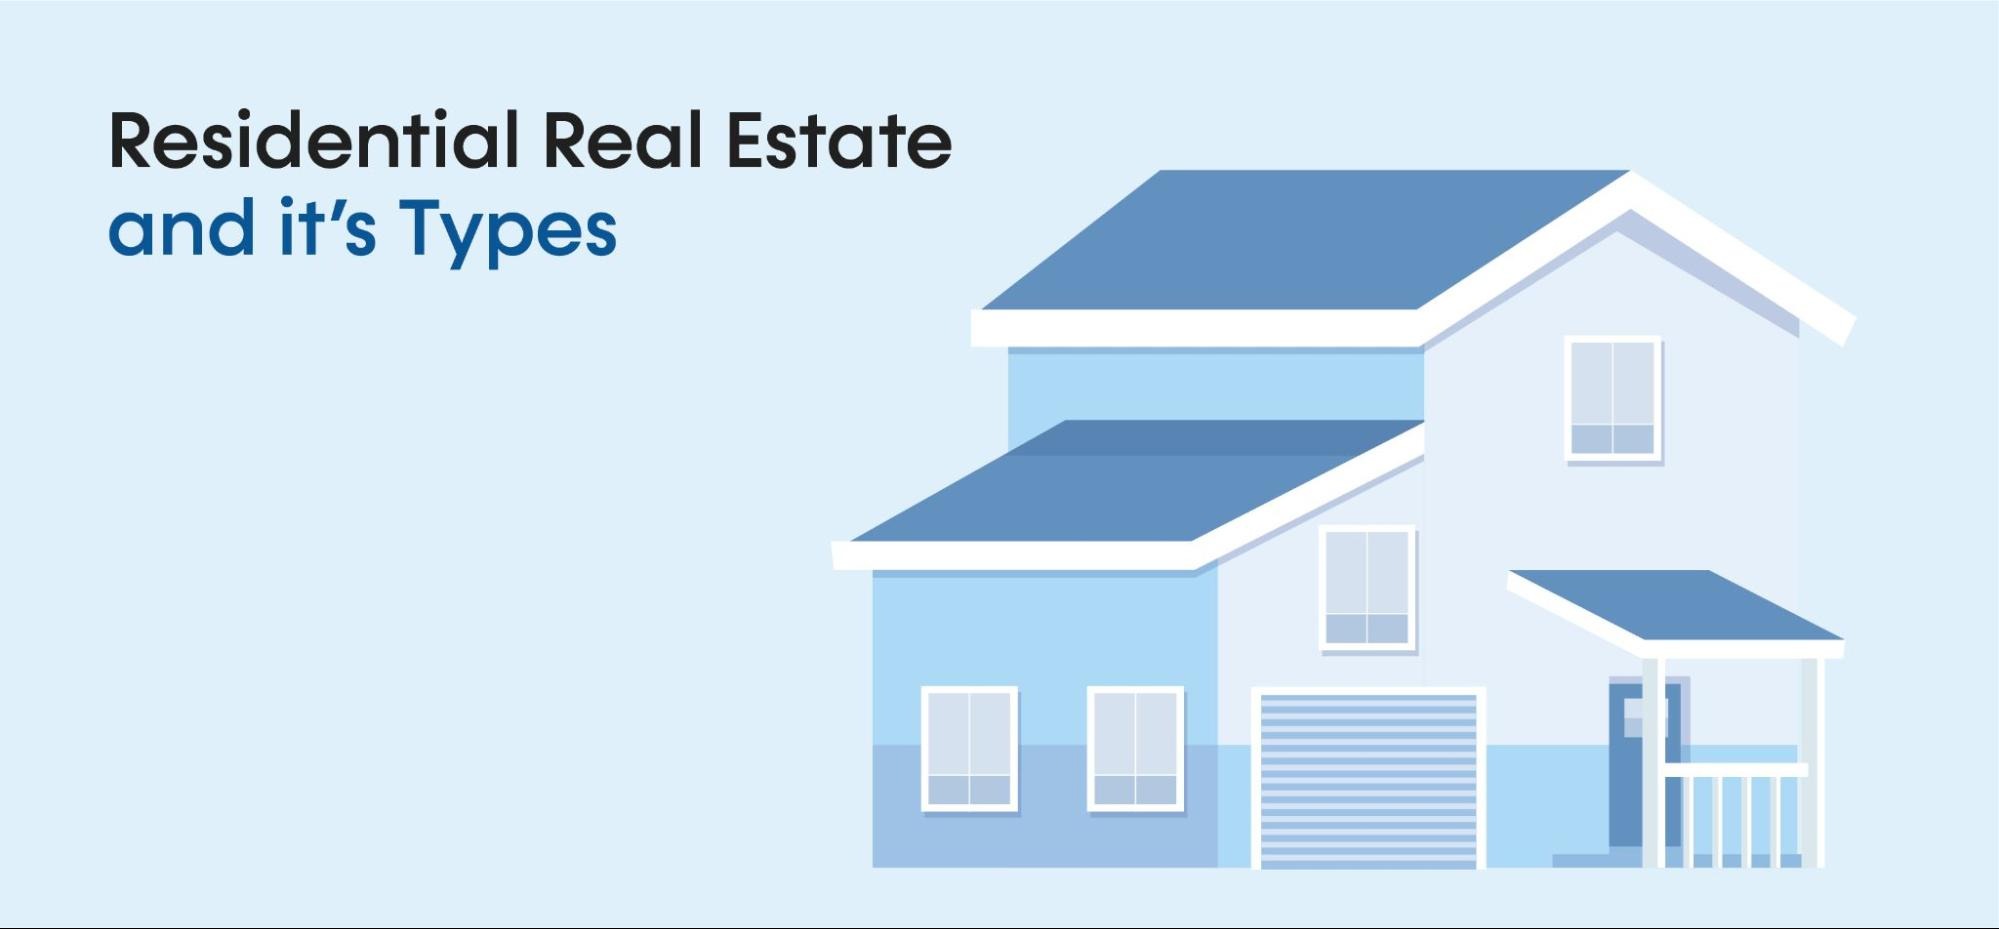 What is Residential Real Estate and it's types?